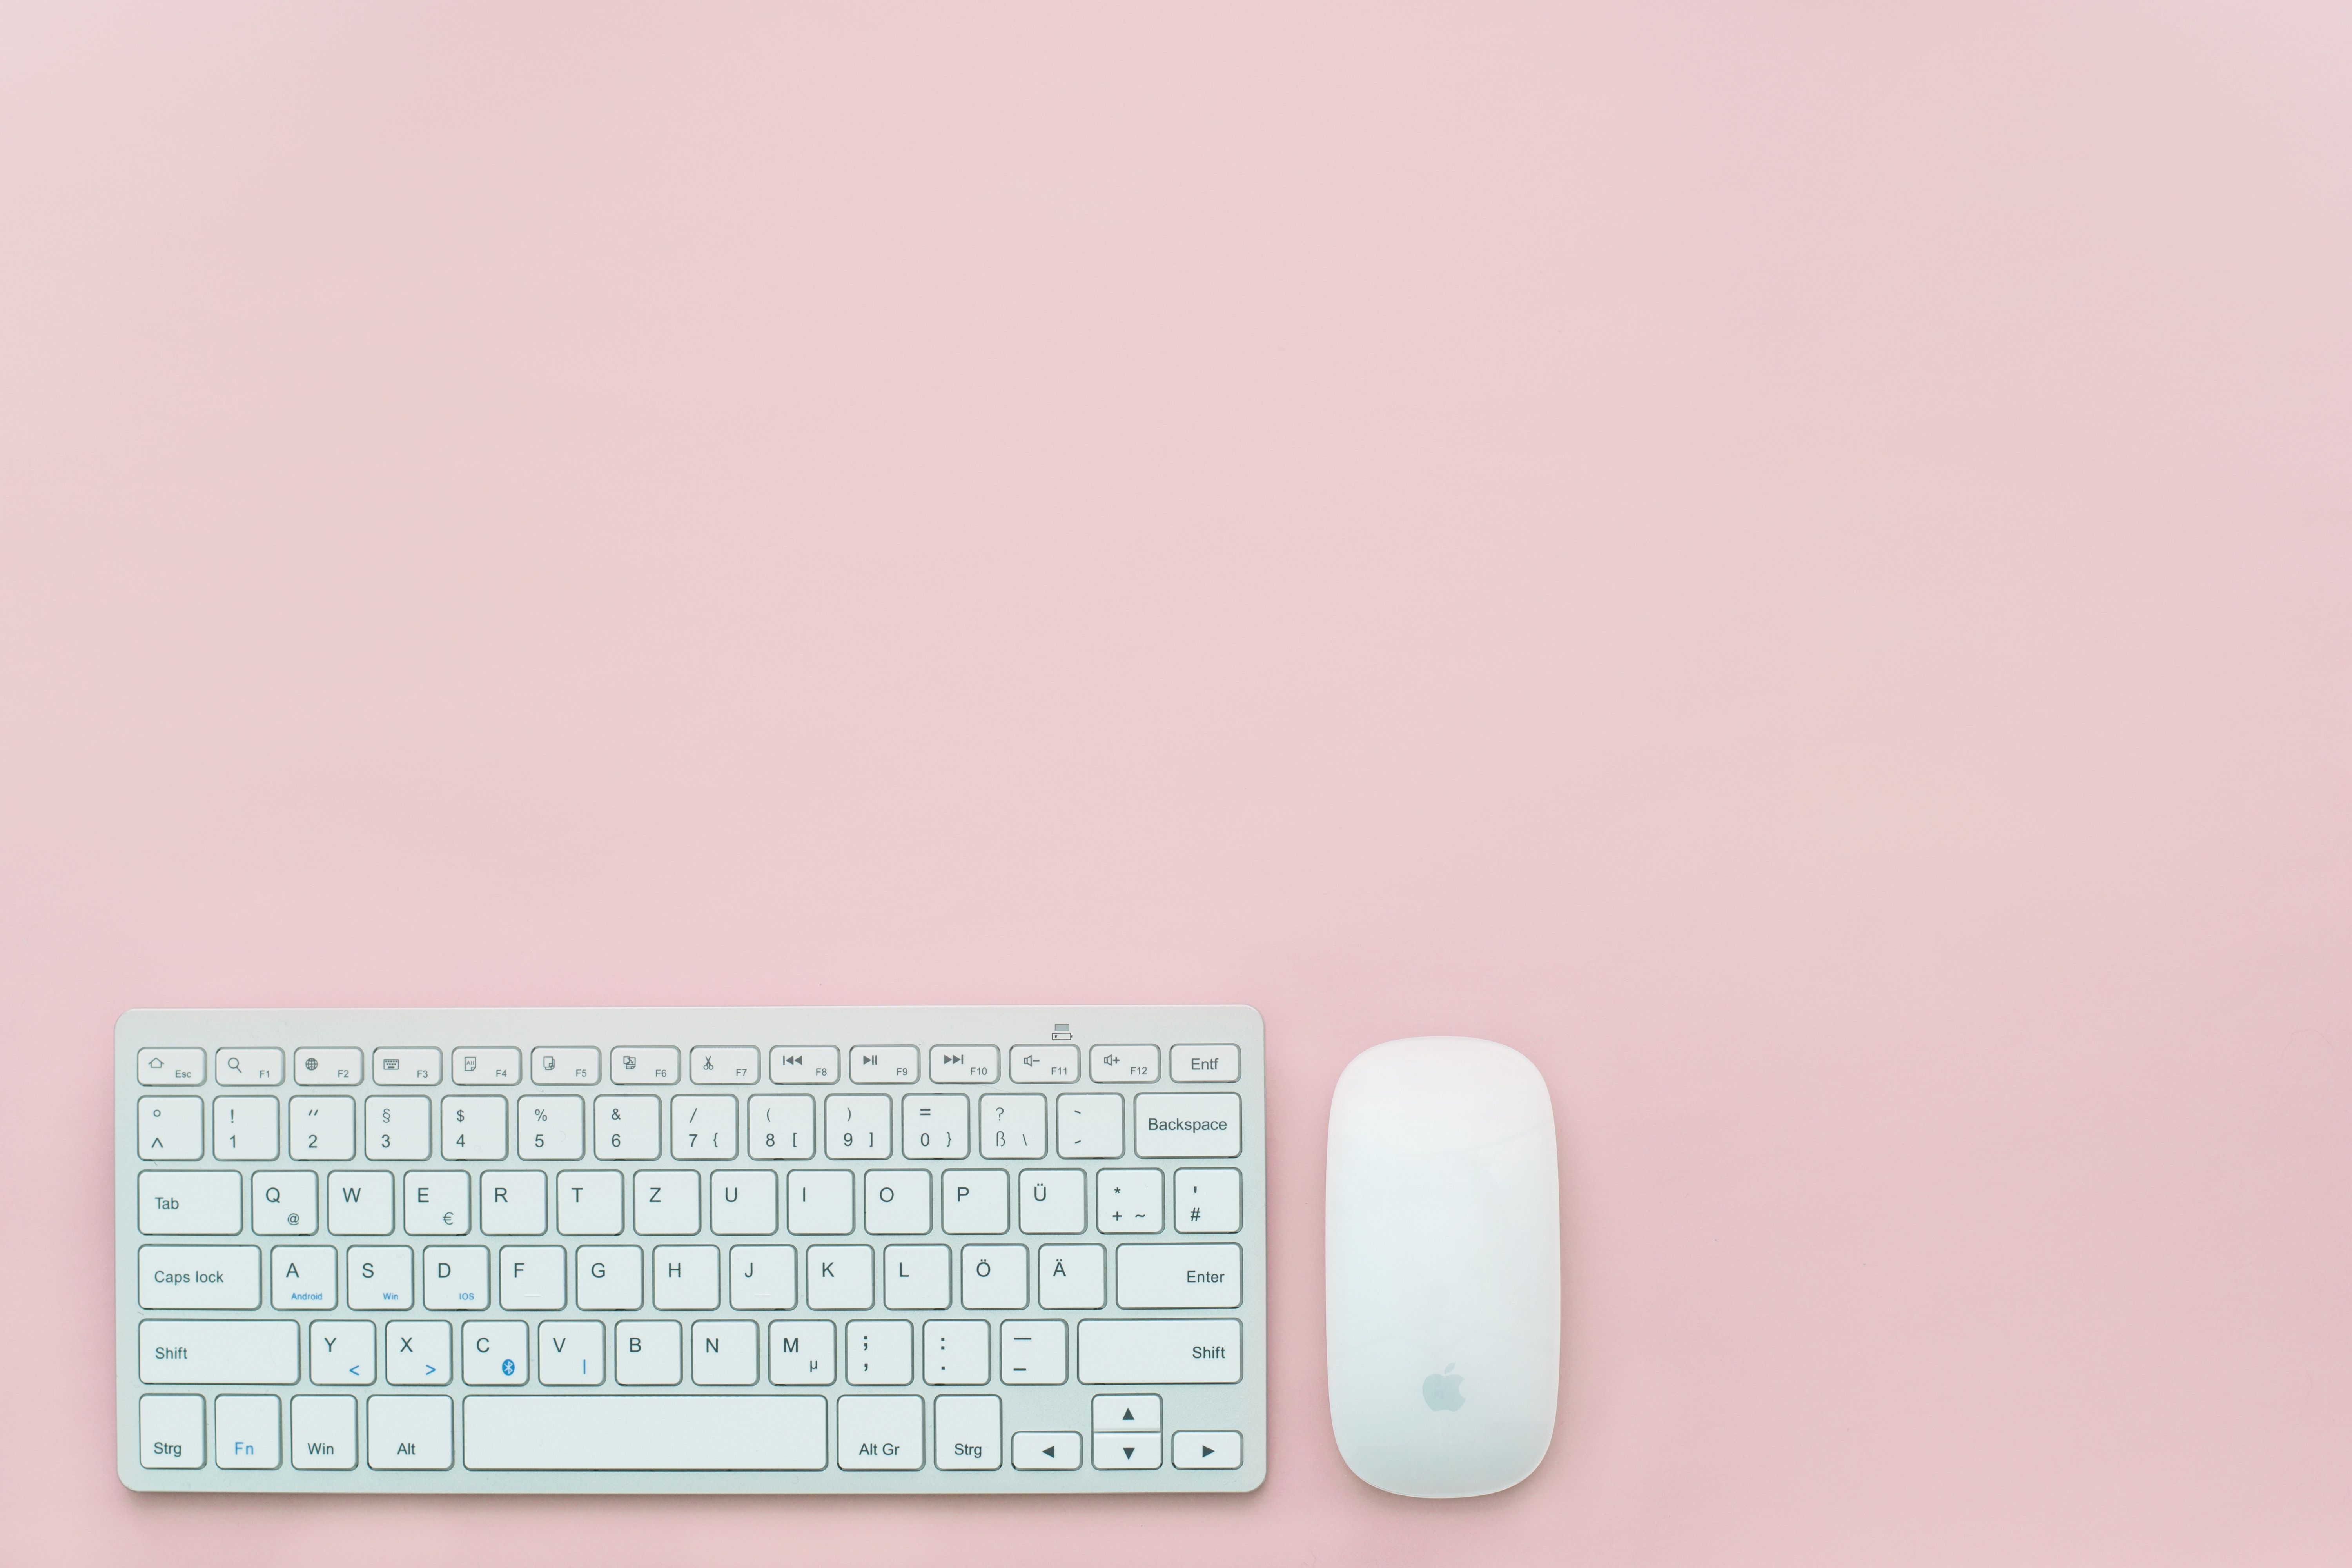 A white keyboard and mouse on a pink background - Technology